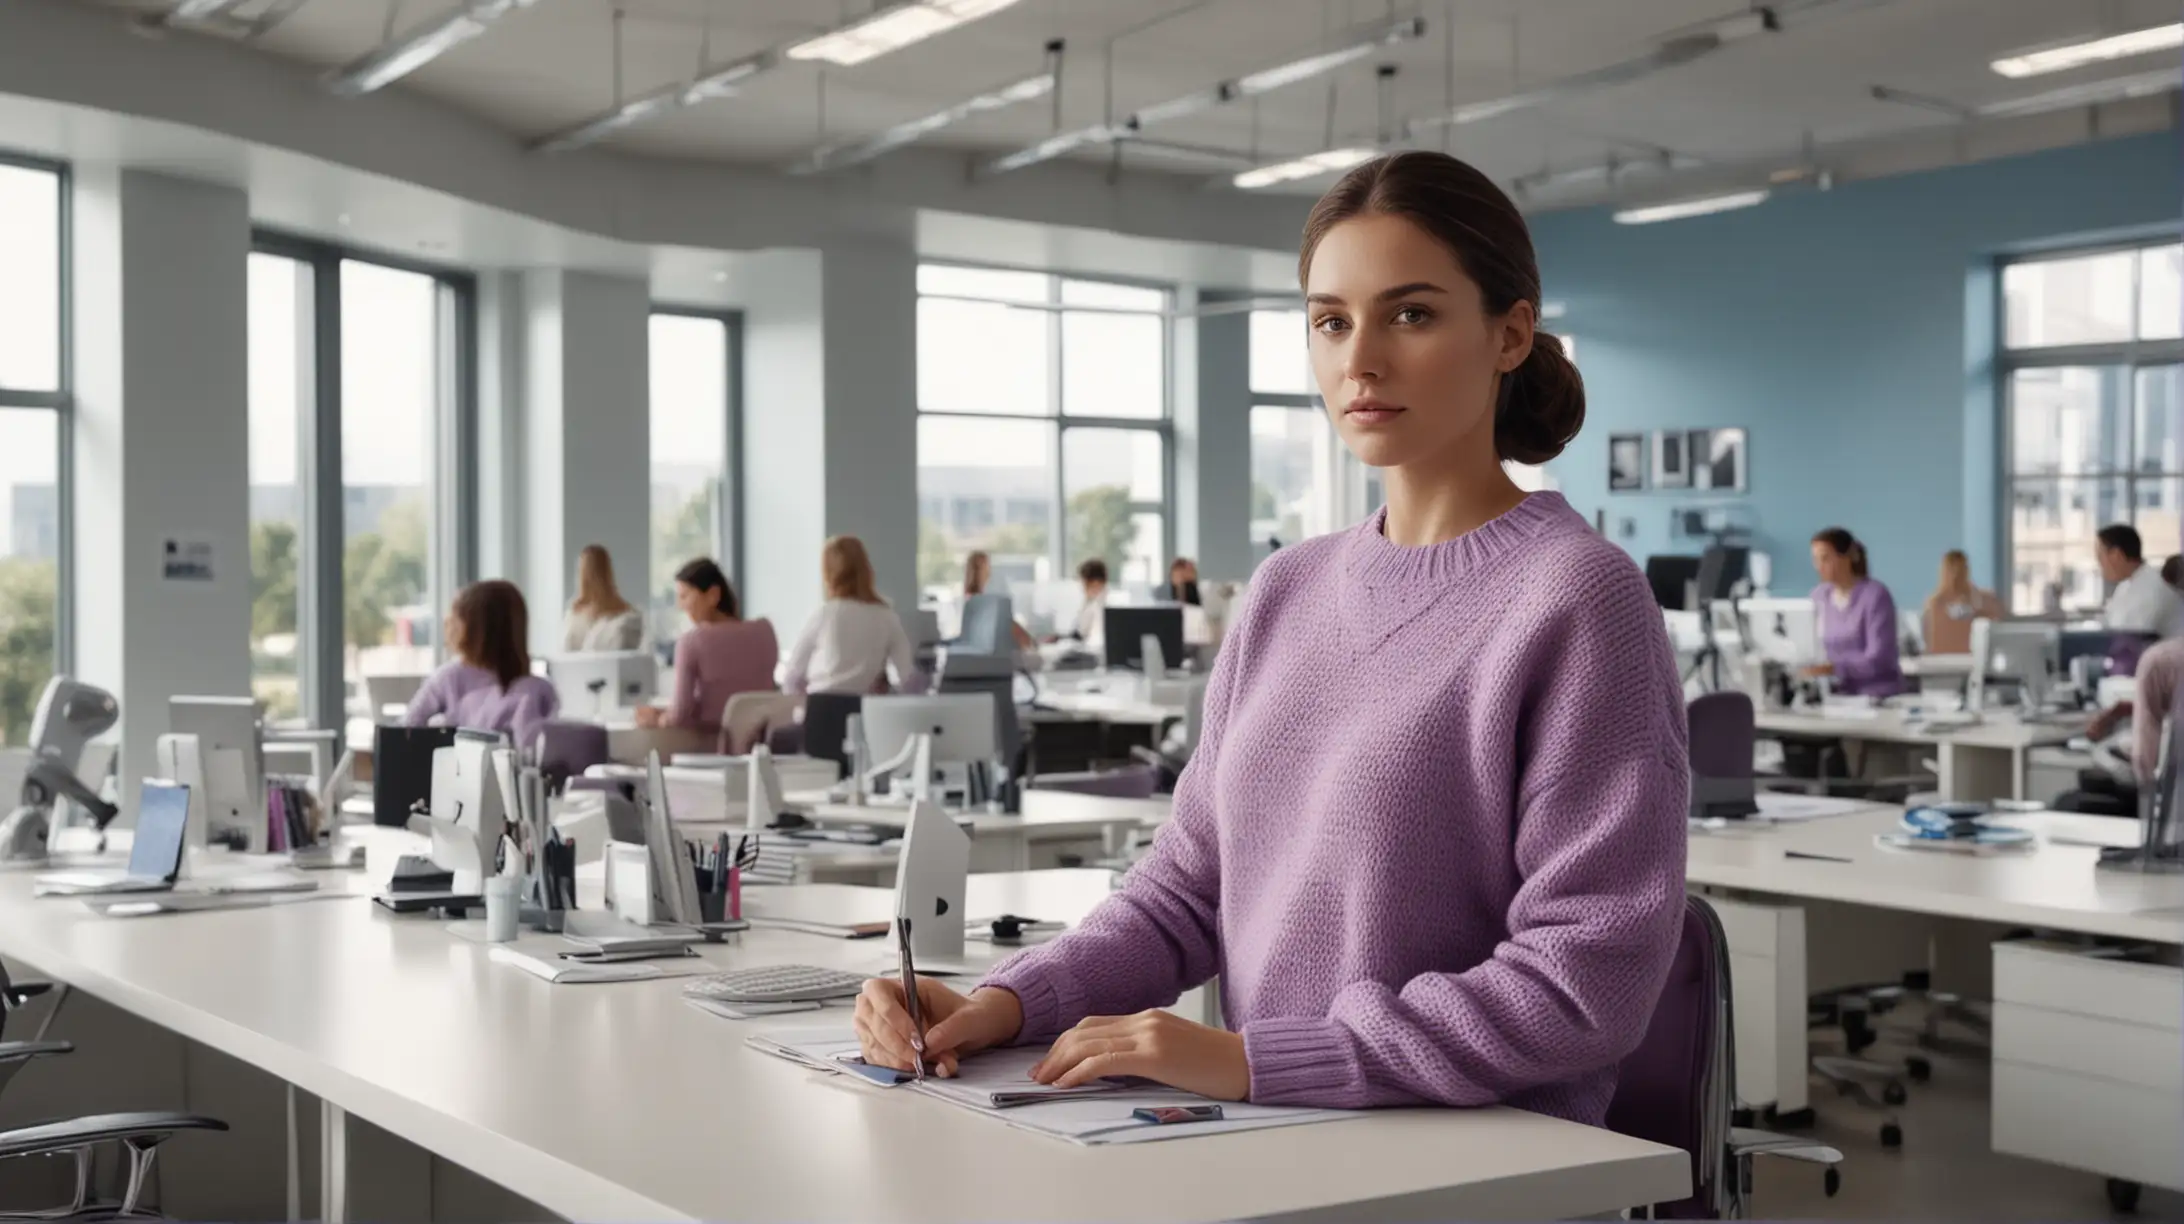 Woman Working in Modern Office with Purple Sweater and Sky Blue Office Environment